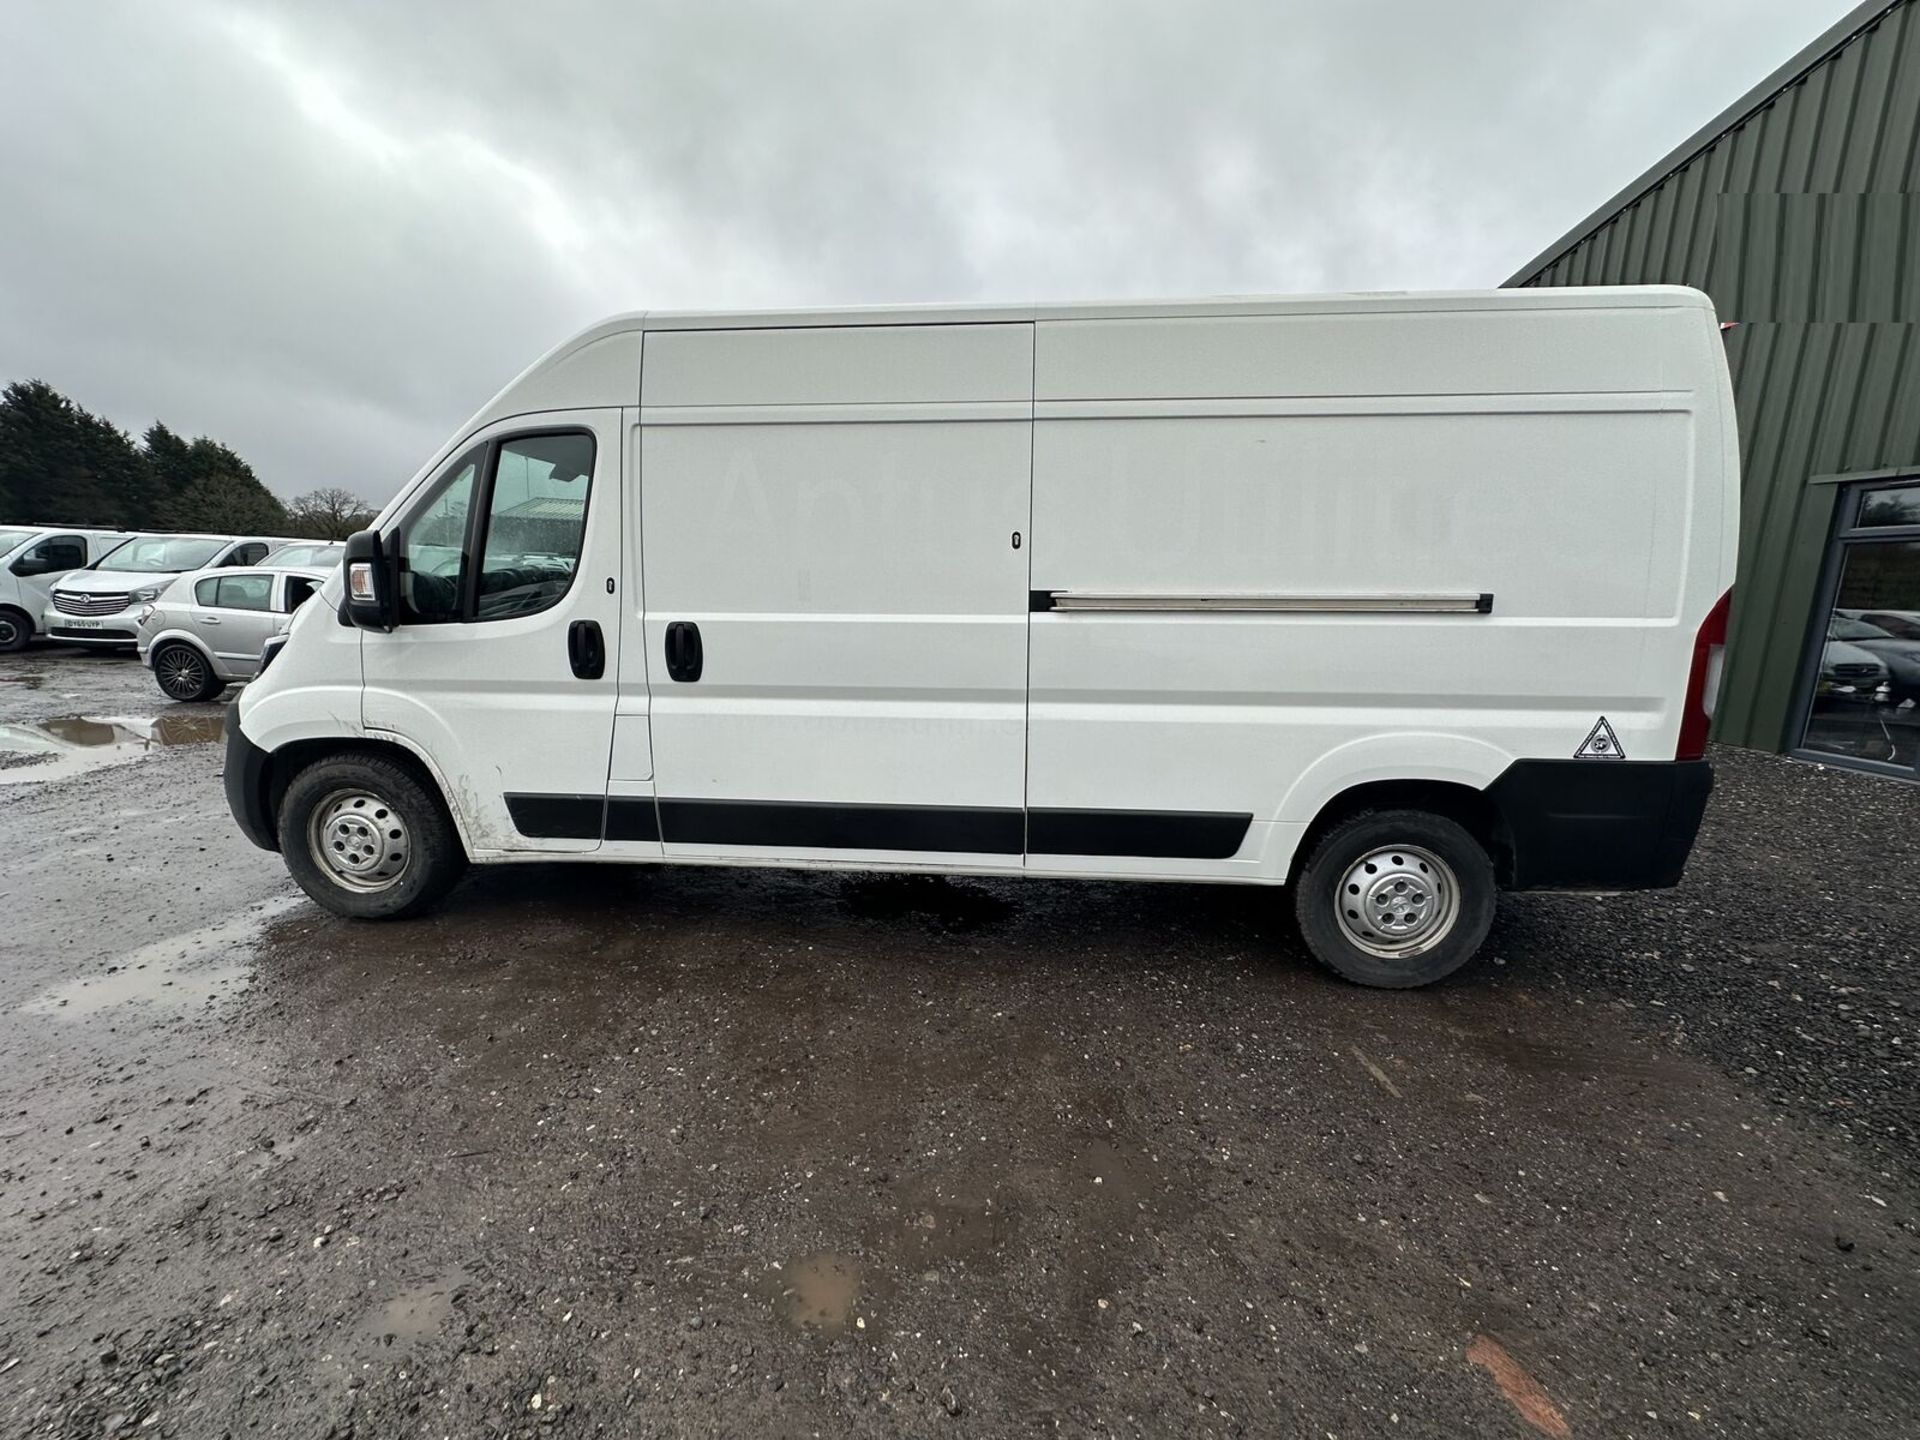 WHITE WORKHORSE: 2019 PANEL VAN, READY FOR DUTY - Image 3 of 18